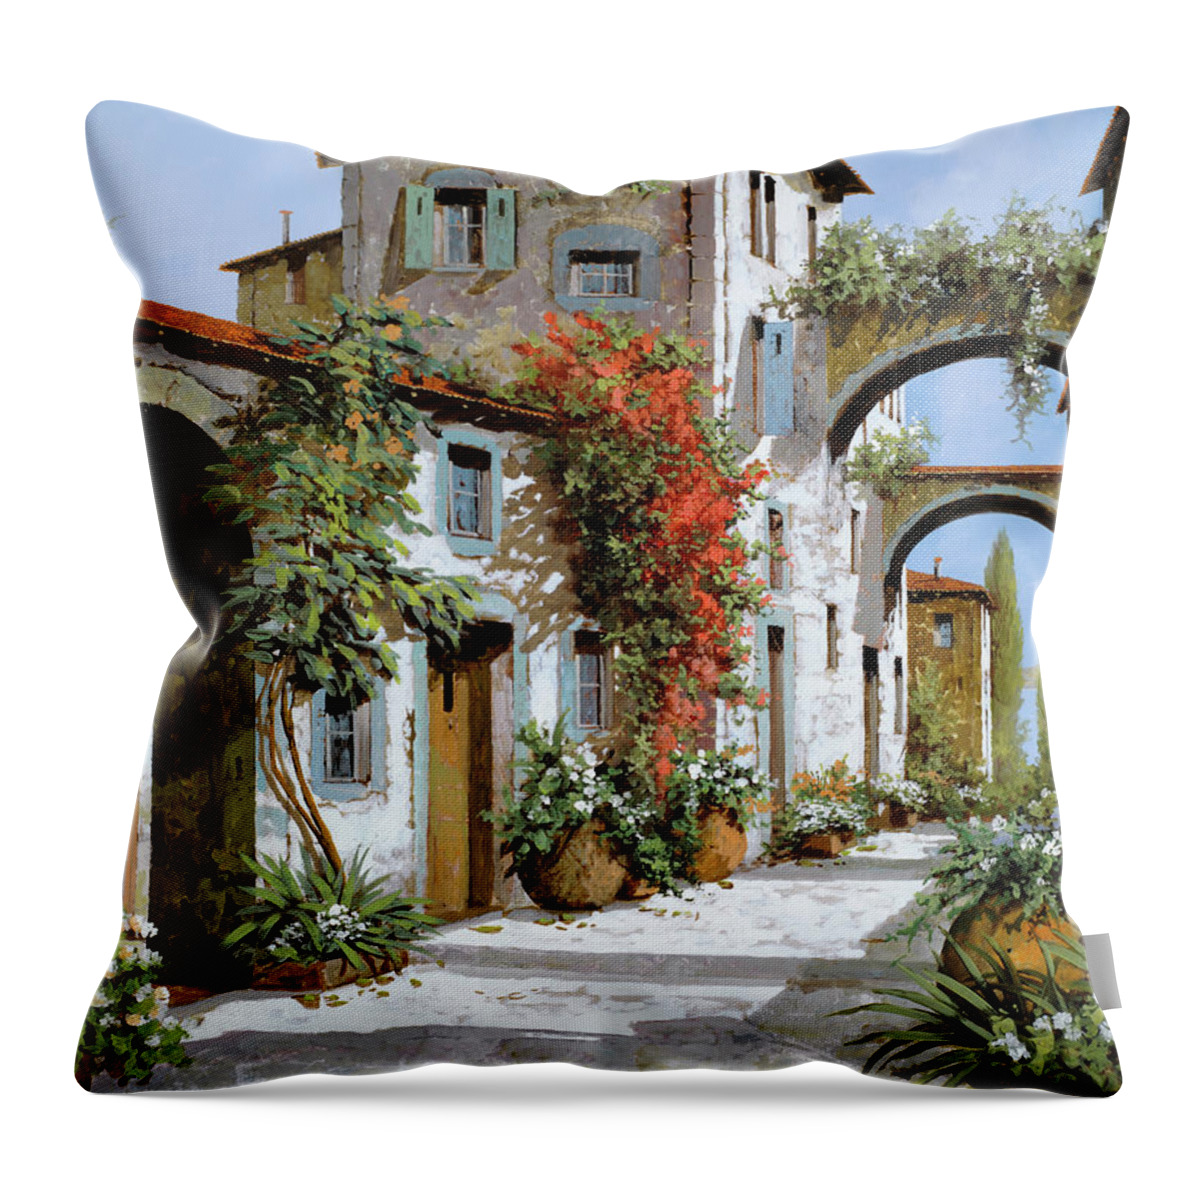 Arches Throw Pillow featuring the painting Altri Archi by Guido Borelli